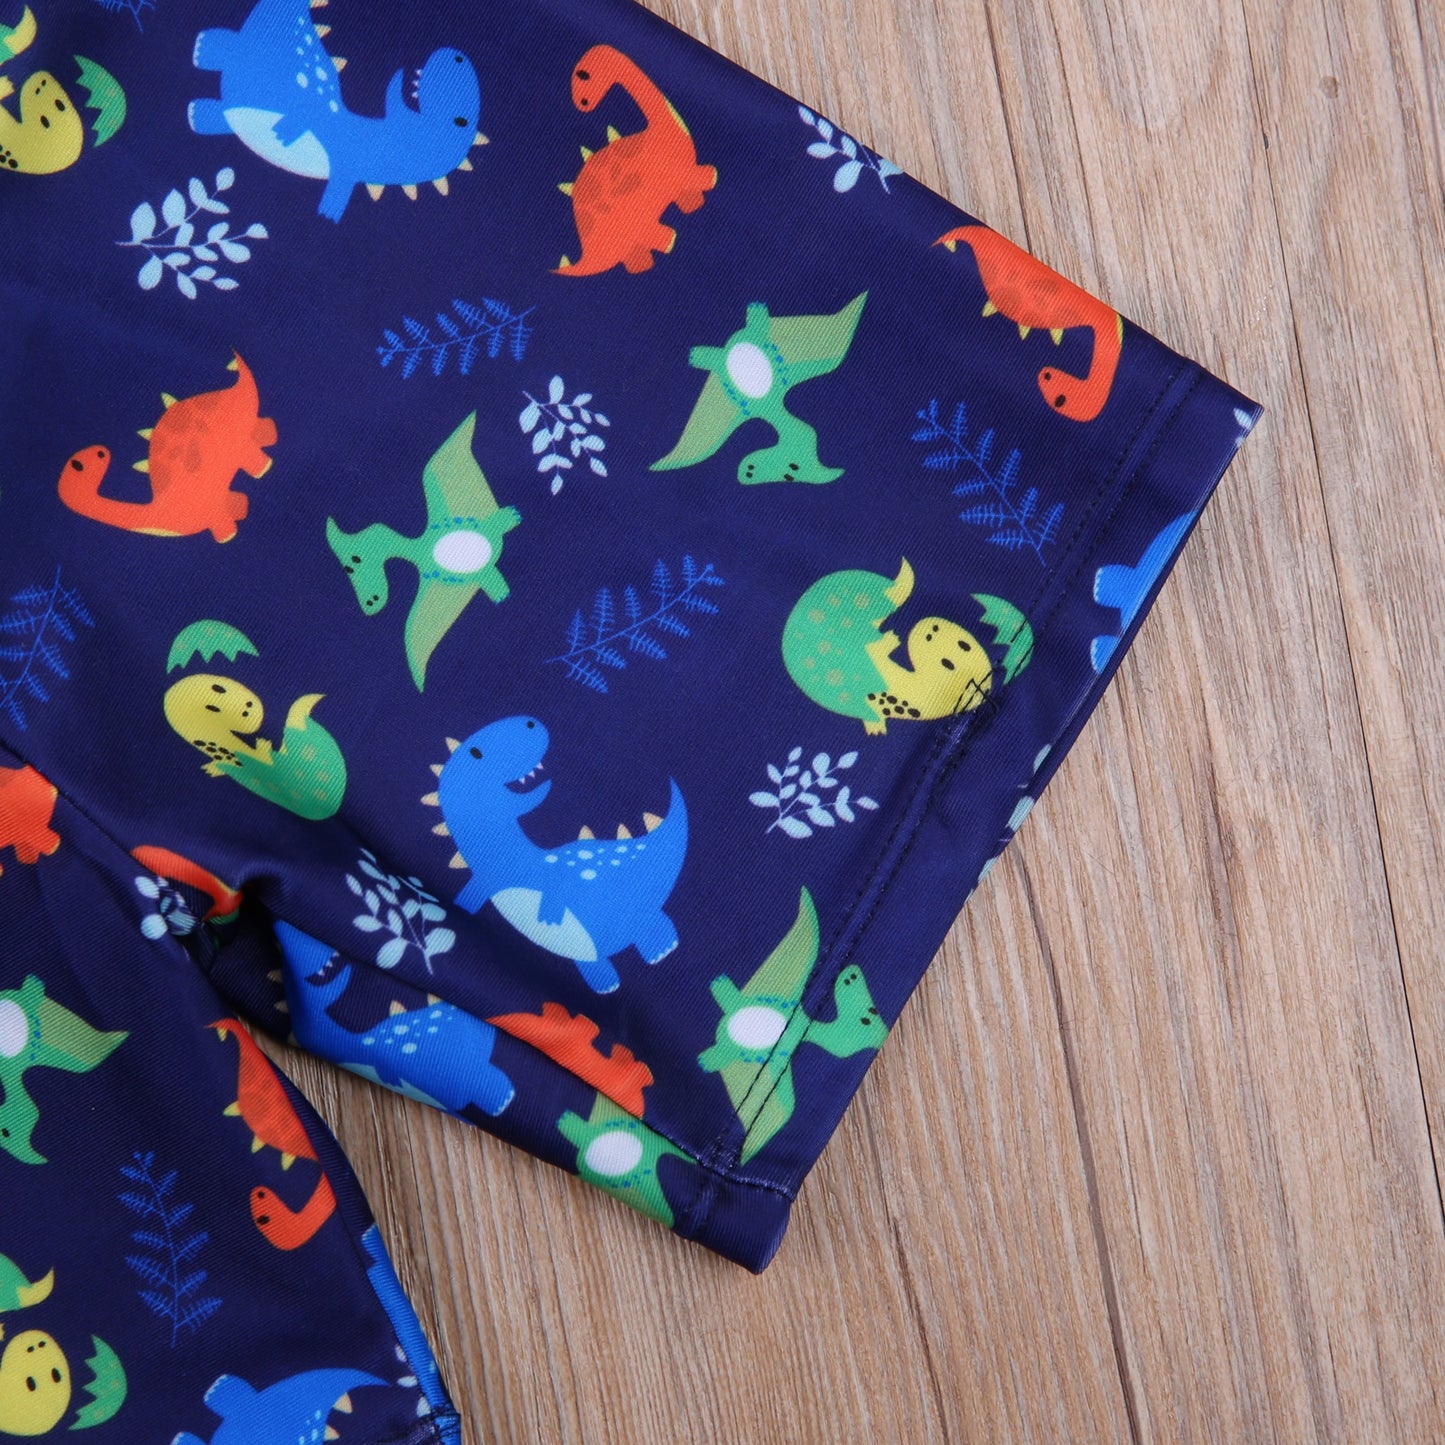 Kids Boy's Swimming Suits Dinosaur Printed Children Two Pieces Summer Swimsuits